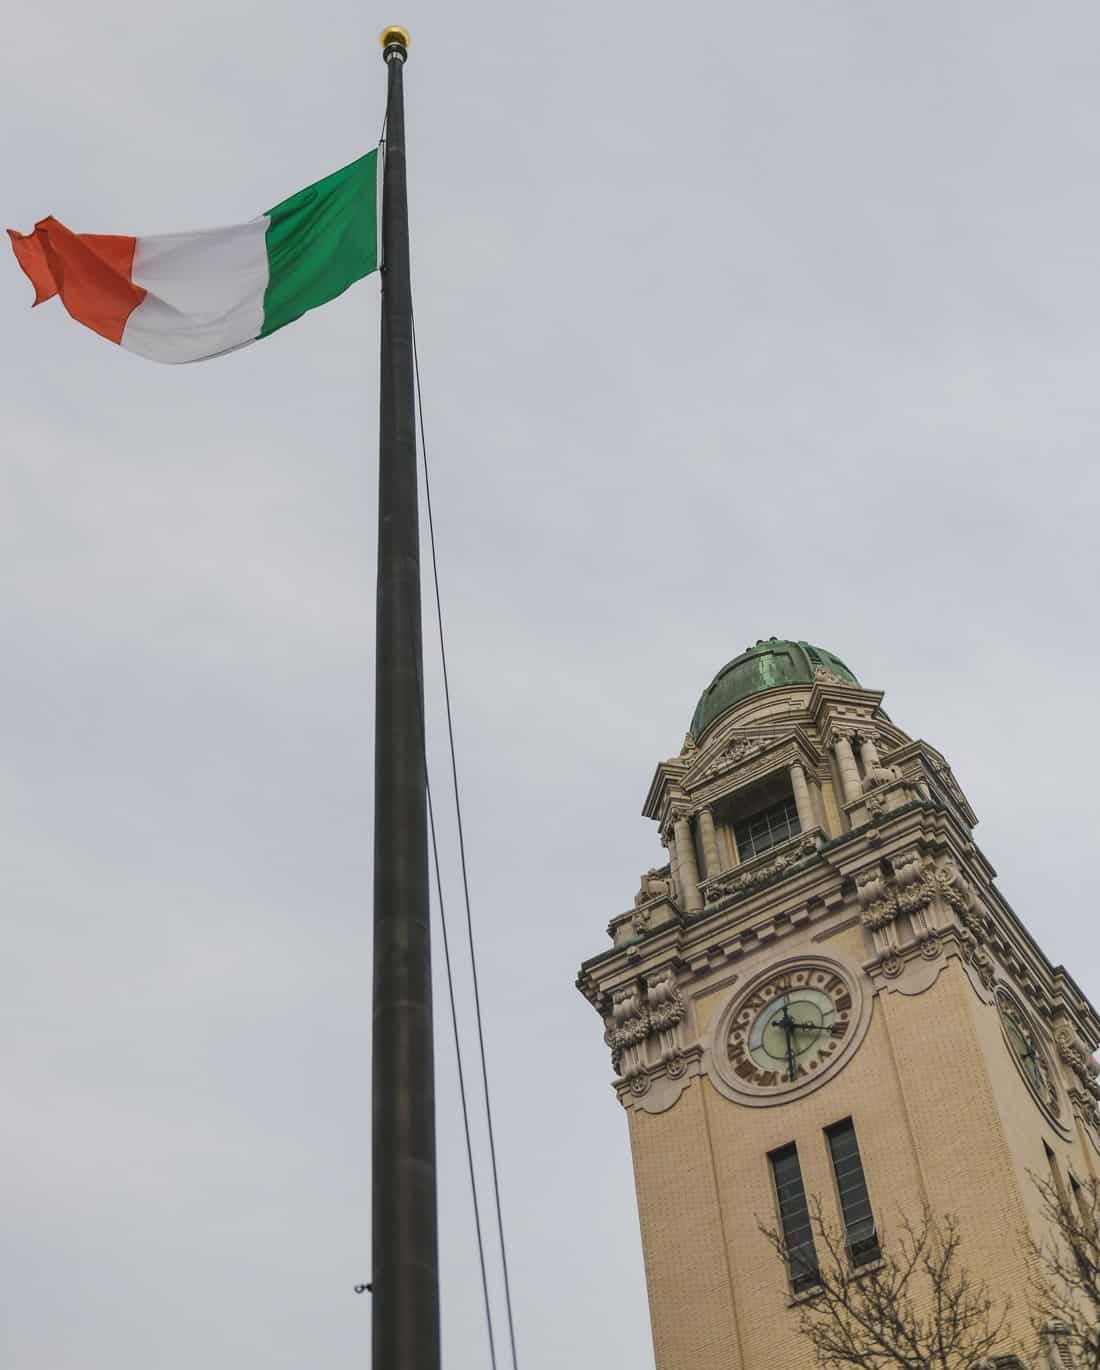 Yonkers Saint Patrick’s Day Parade on McLean Named Top 10 in USA, Set